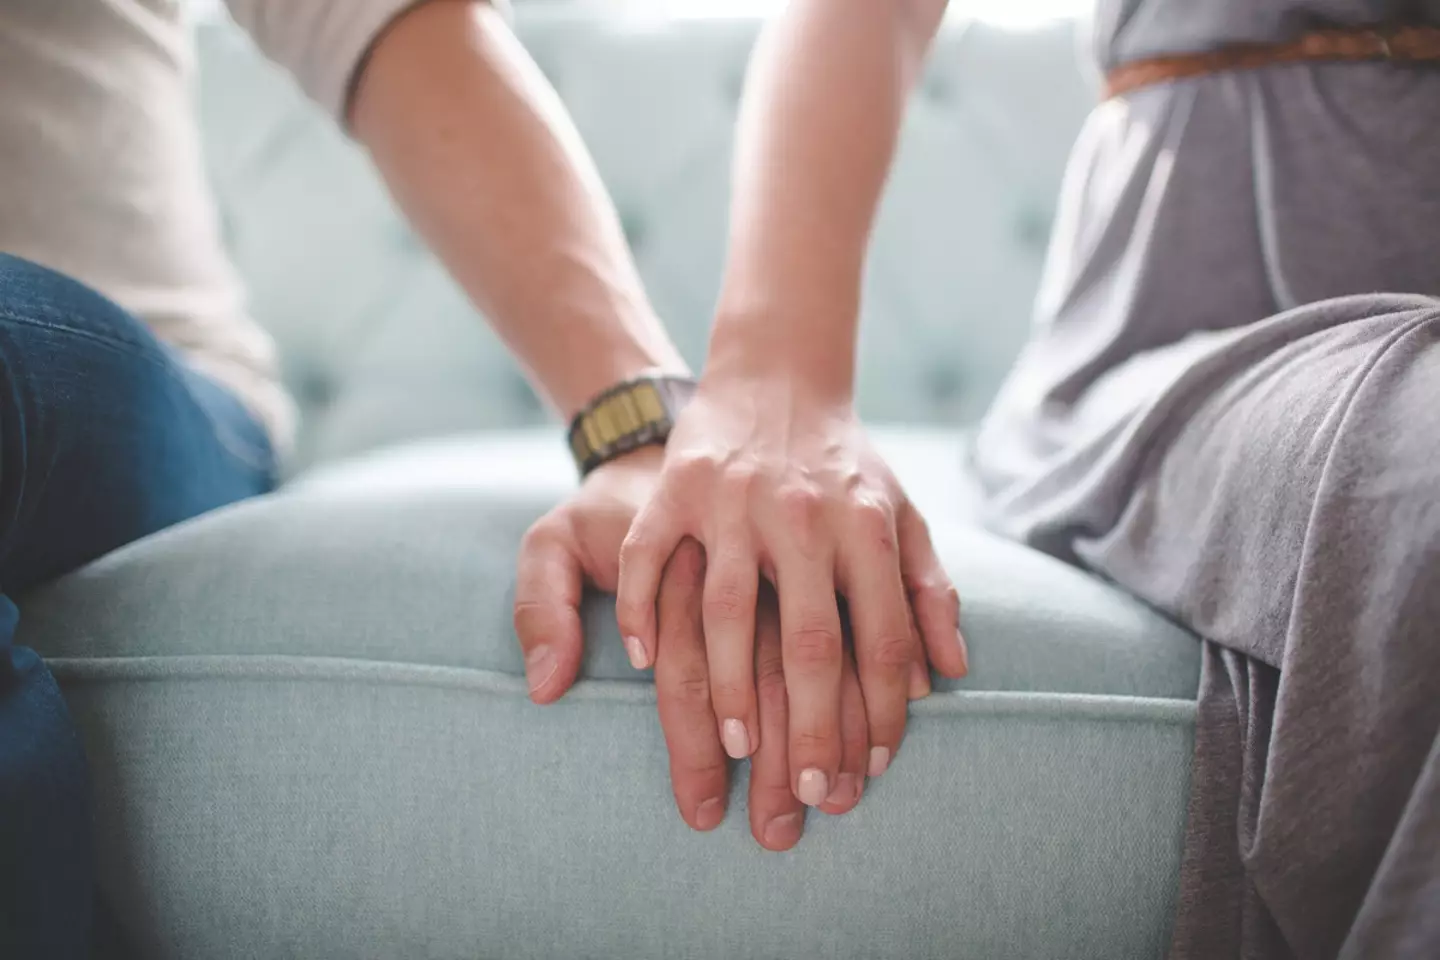 "I'm glad we got a sofa wide enough to have a whole cushion to hold hands on."